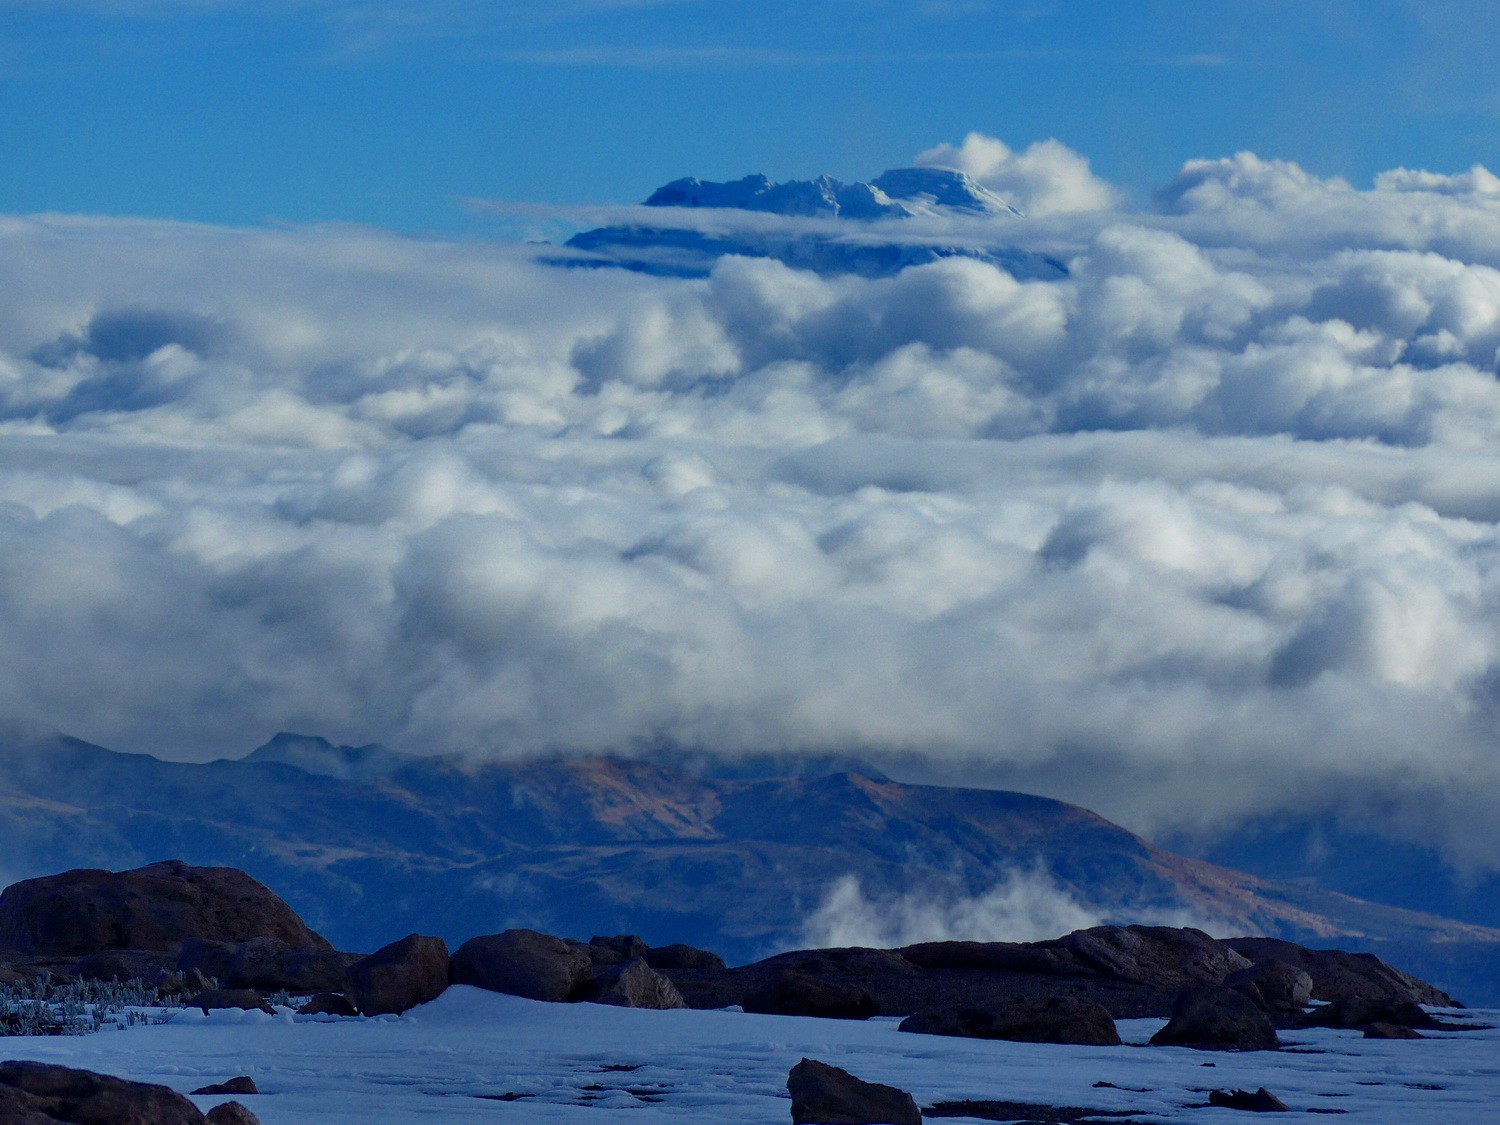 Antizana with 5740 meters sea-level the 4th highest summit of Ecuador (after Chimborazo, Cotopaxi and Cayambe)